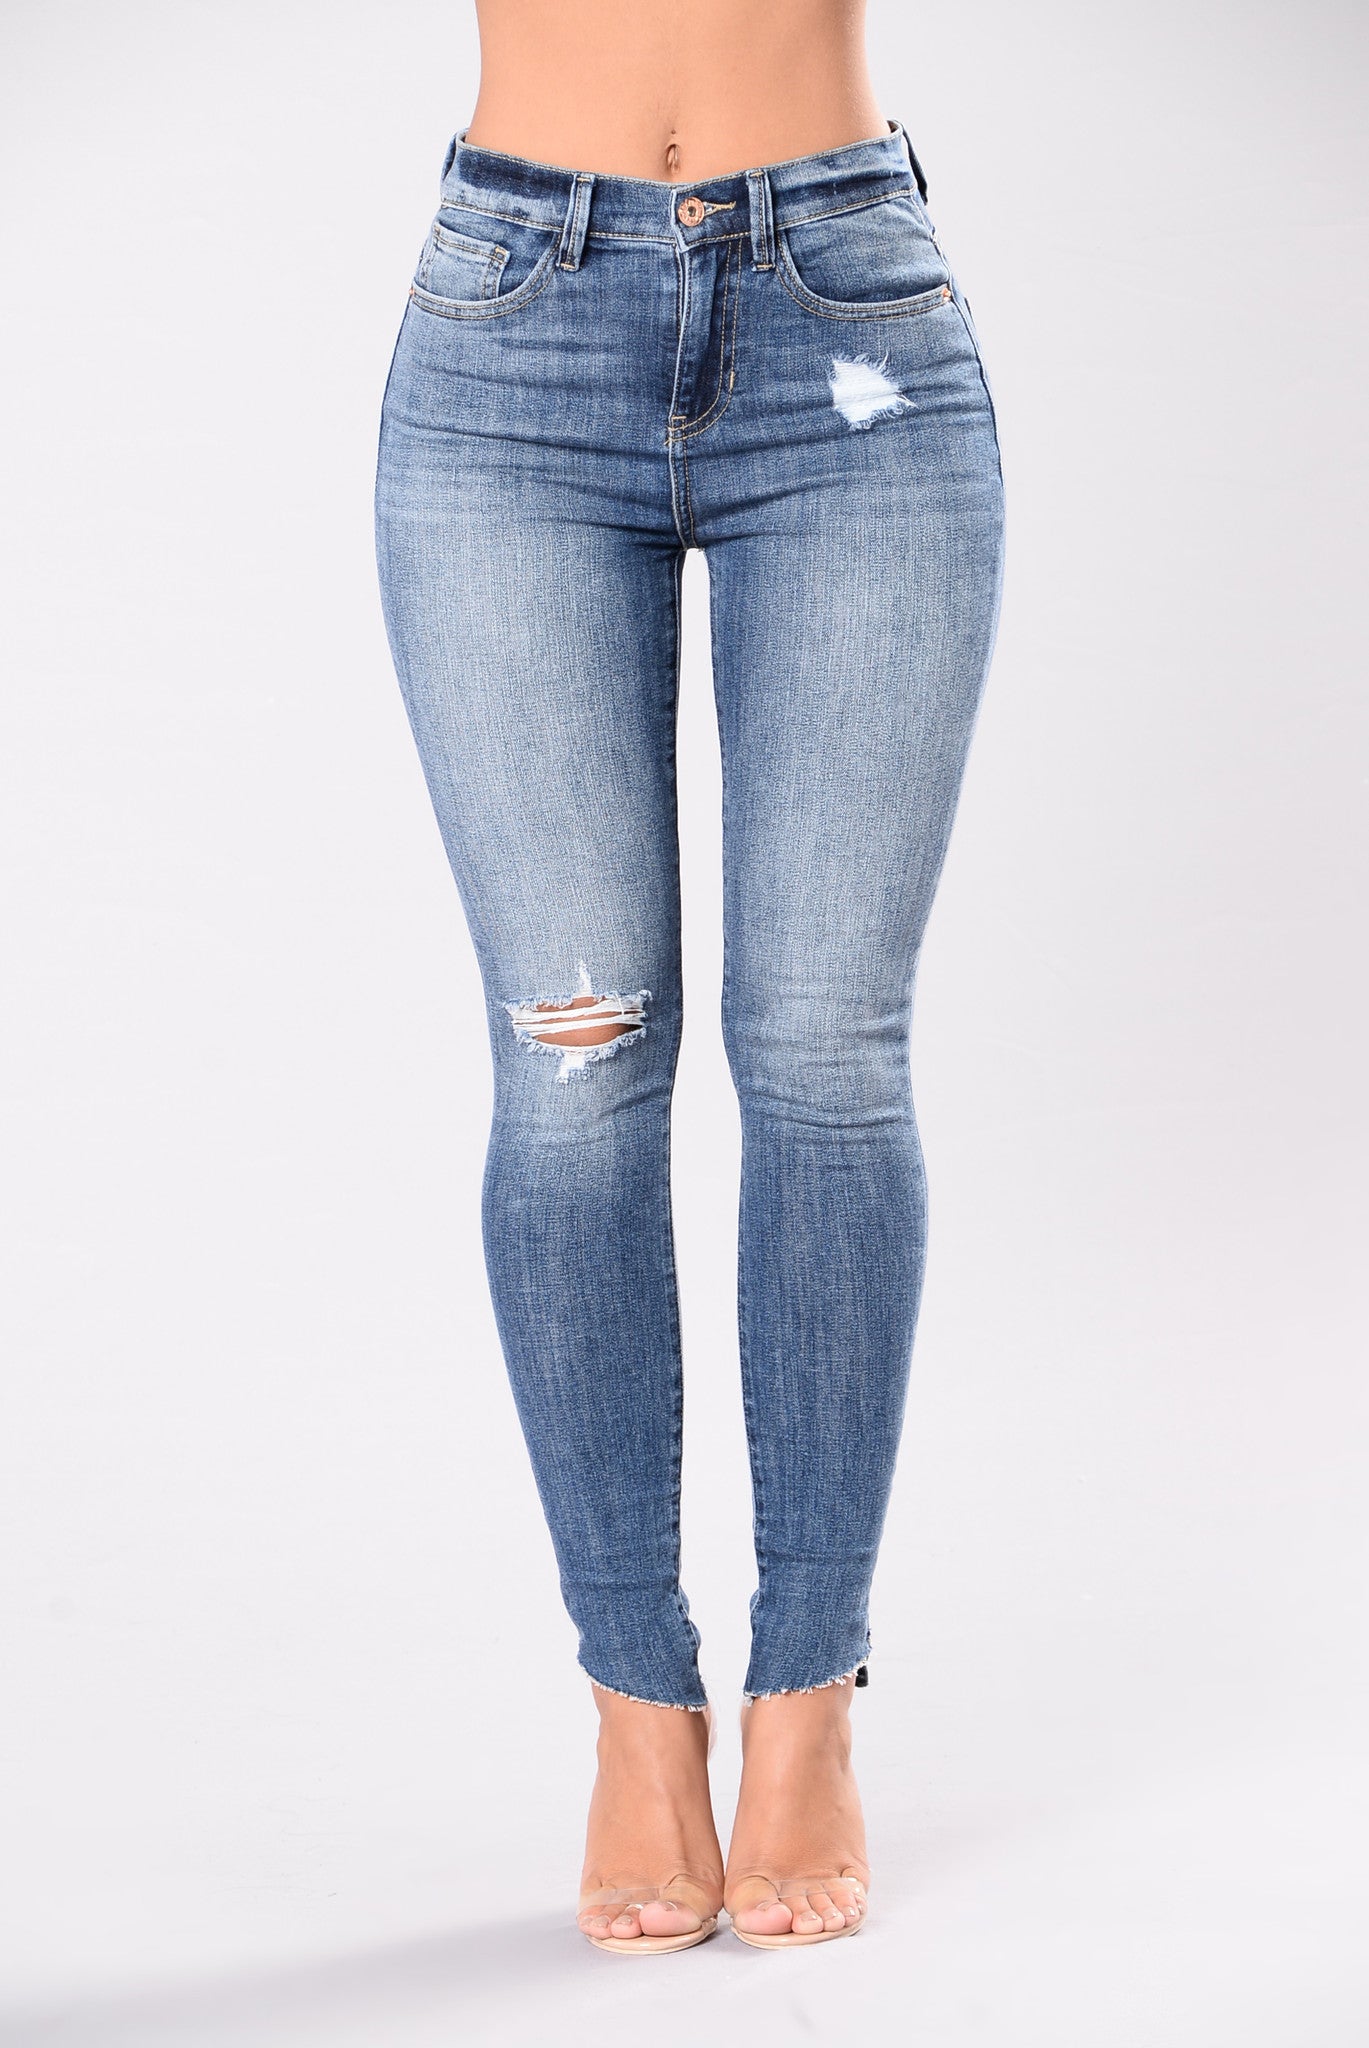 Something About Us Jeans - Medium